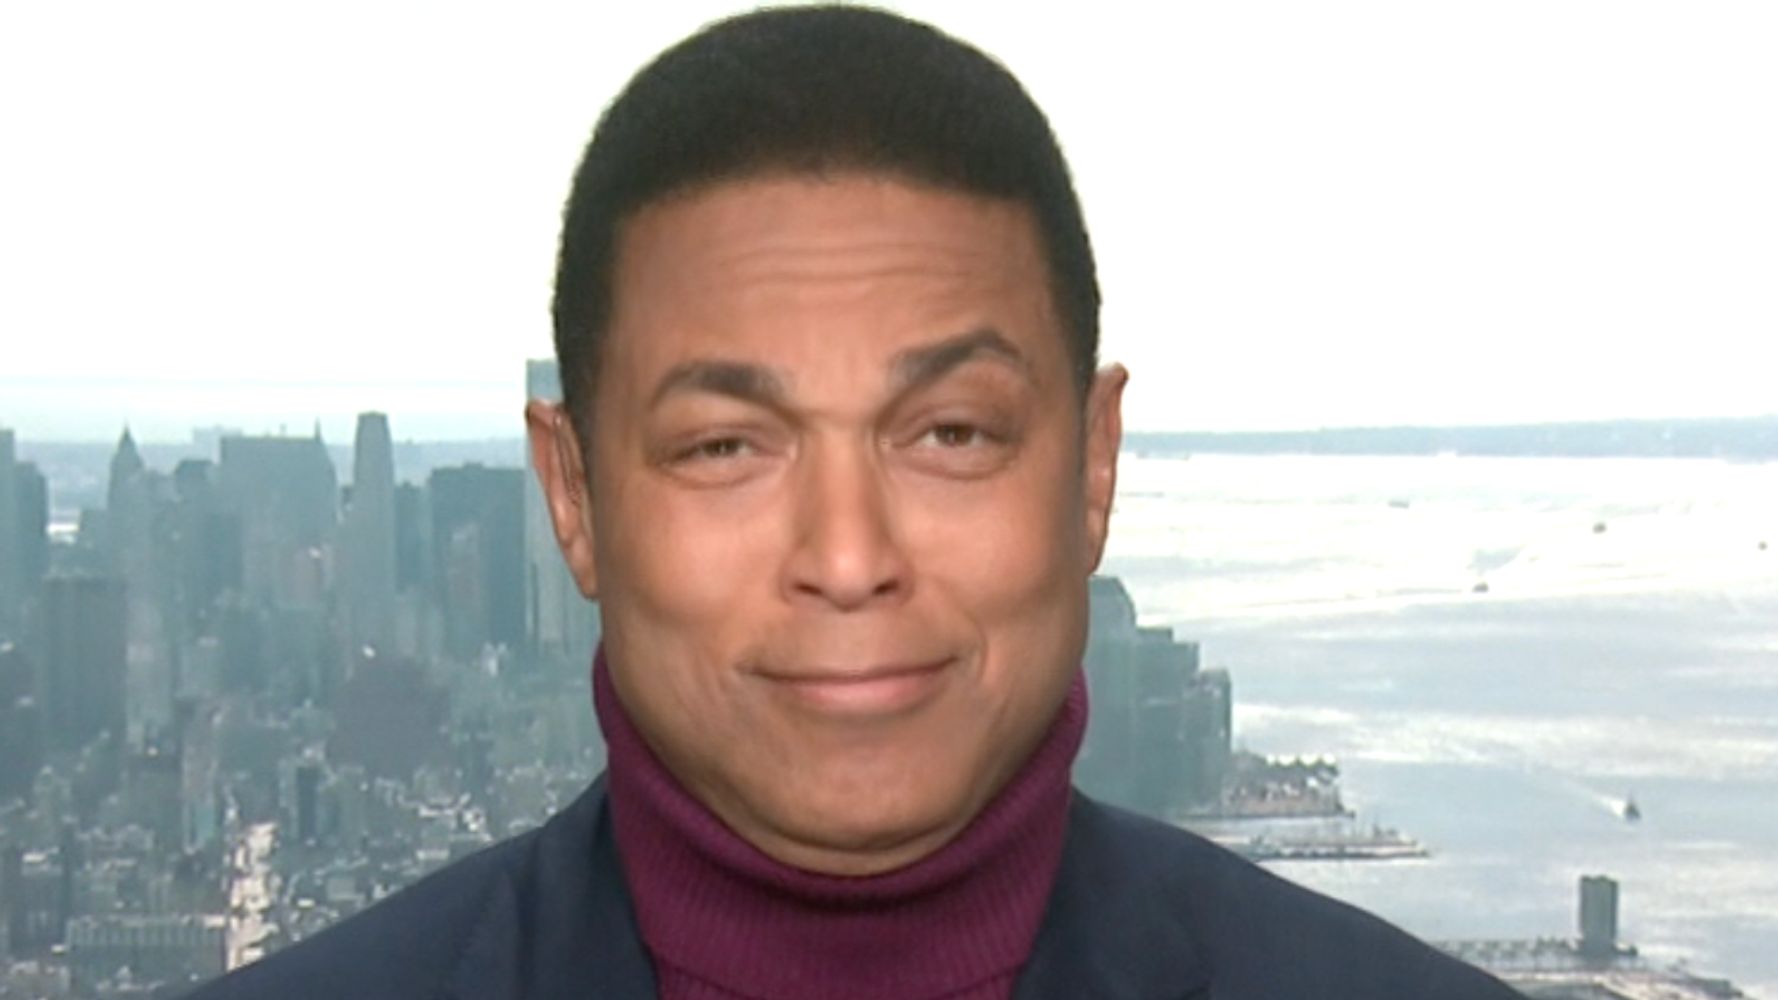 Don Lemon was not surprised by Harry and Meghan’s interview and said “it is clear” that the monarchy is racist